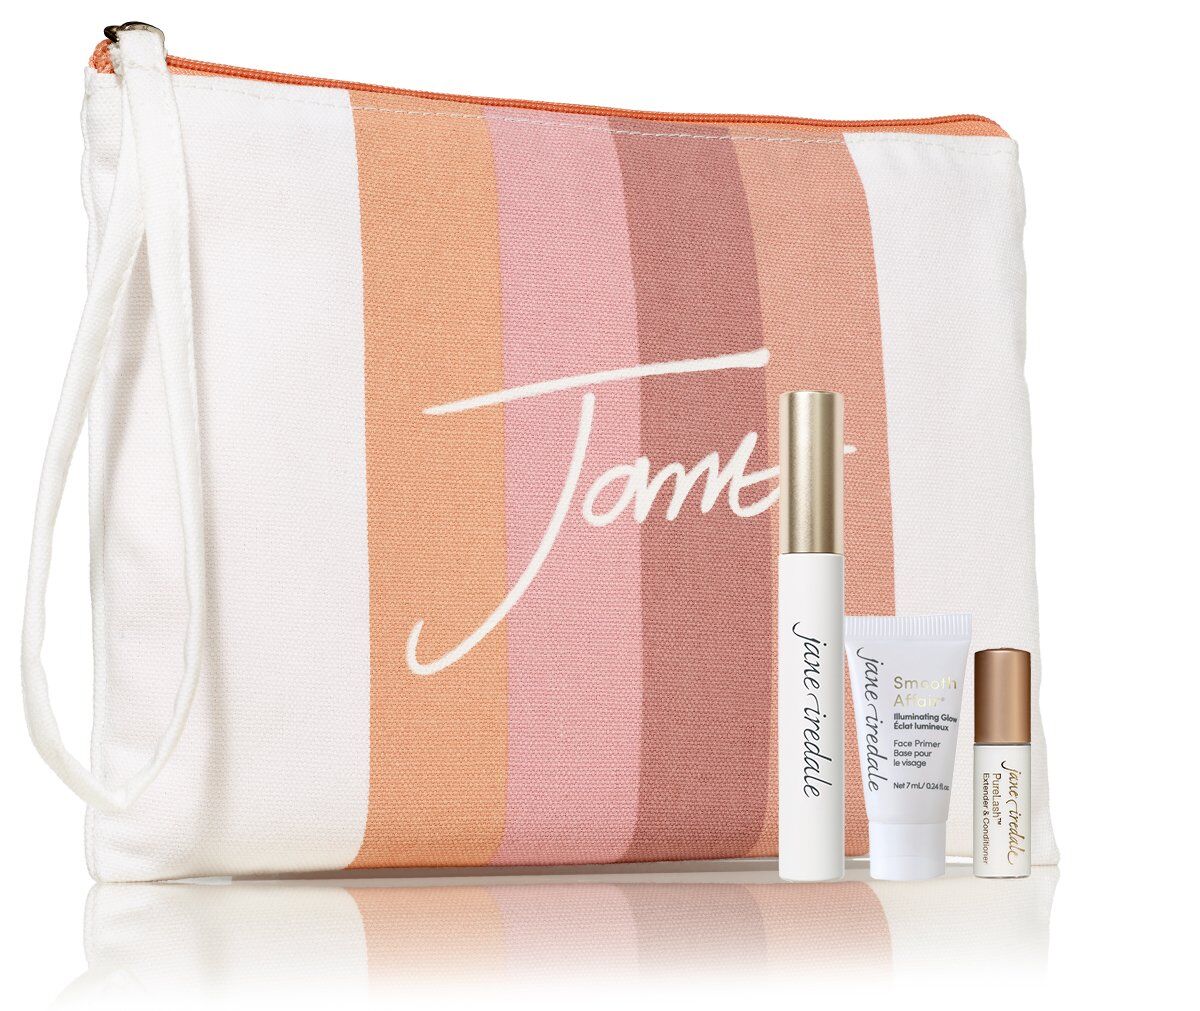 jane iredale gift with purchase. Our celebration, Your gift